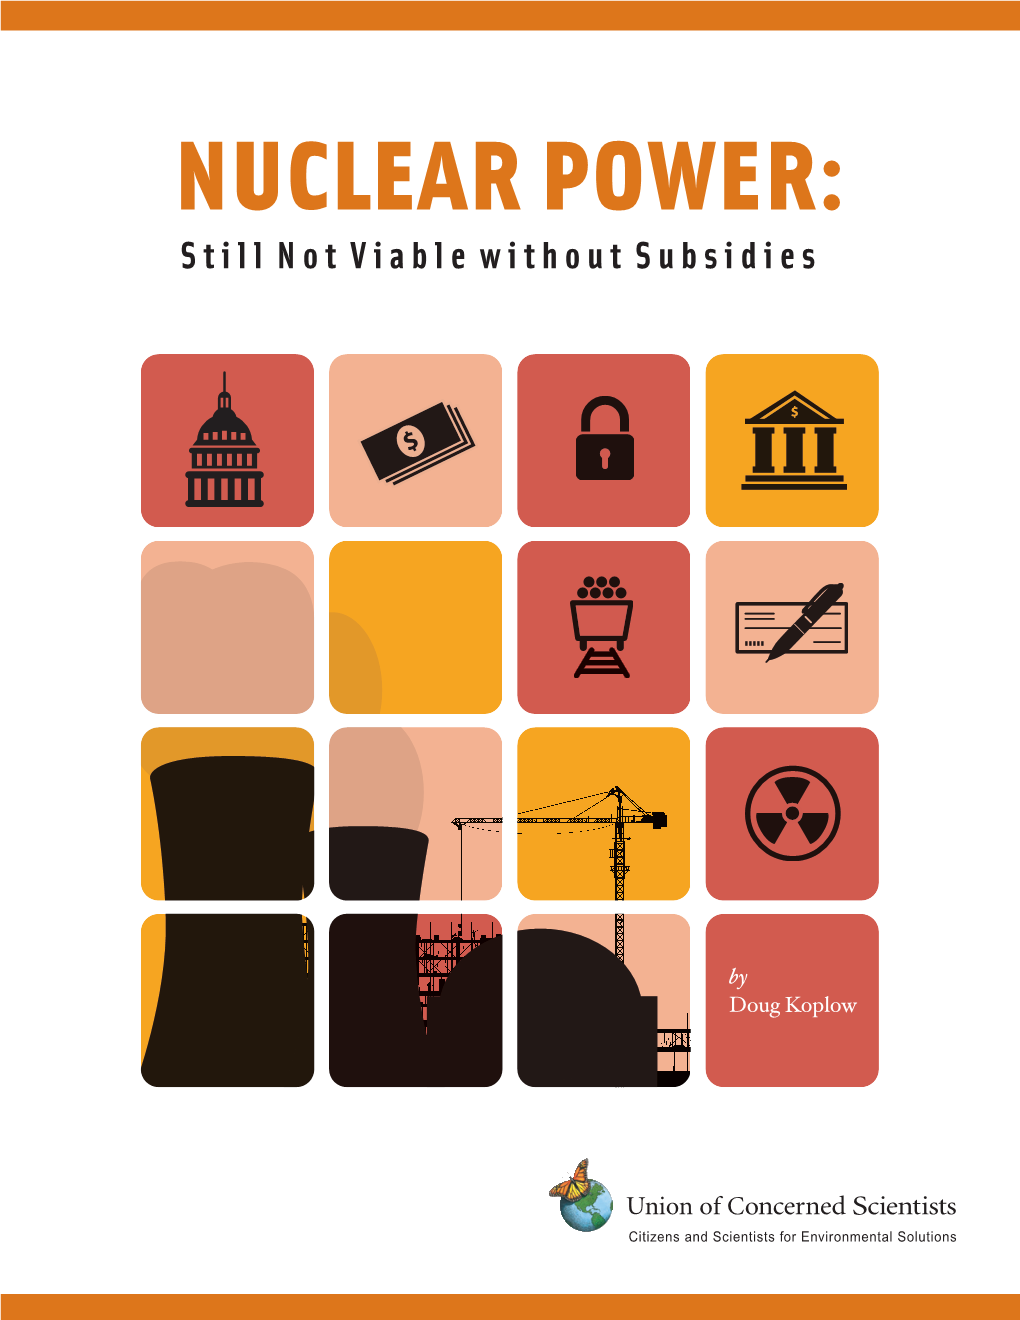 NUCLEAR POWER: Still Not Viable Without Subsidies